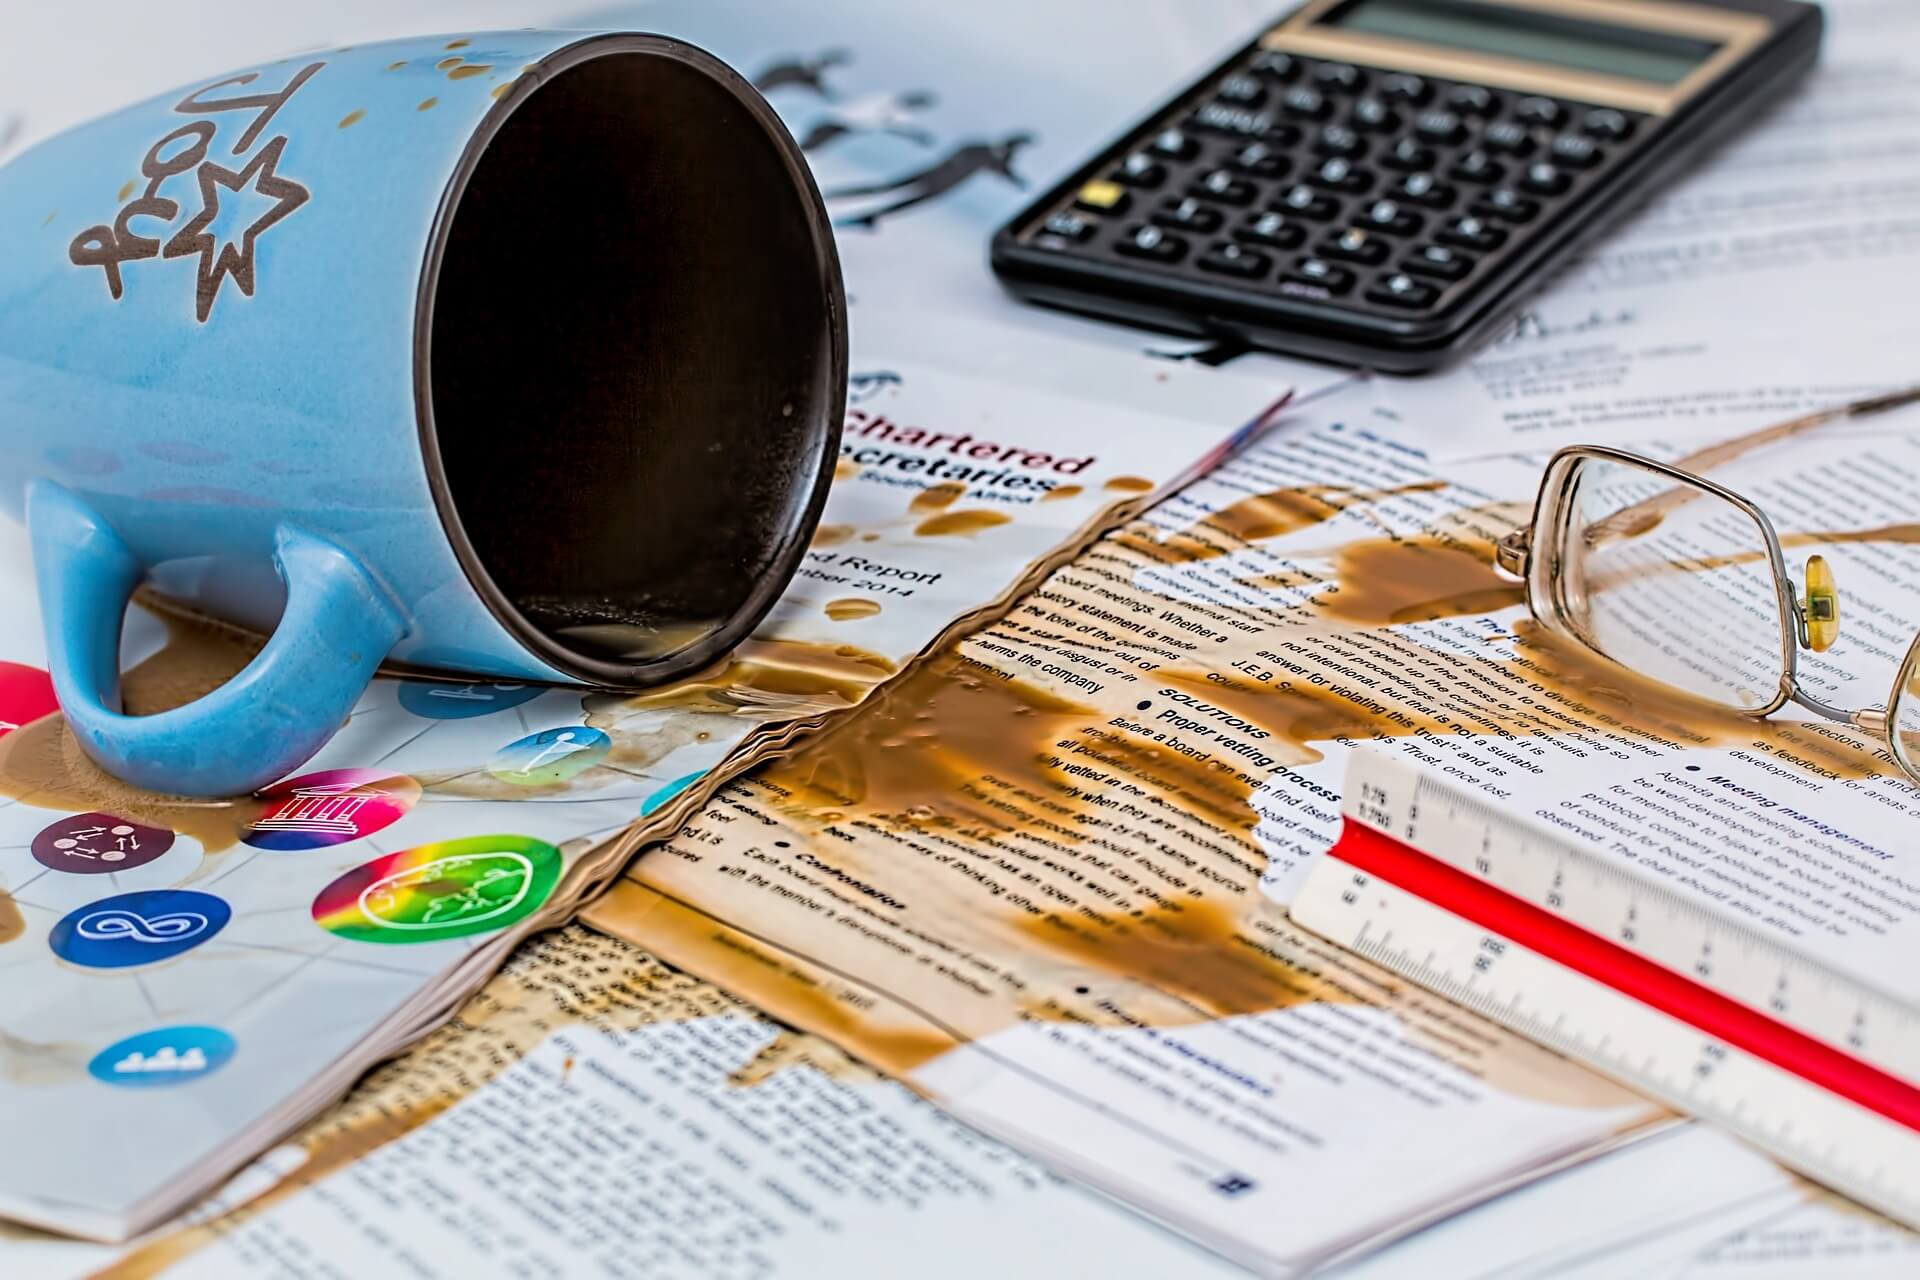 cup of coffee spilled over documents on a desk